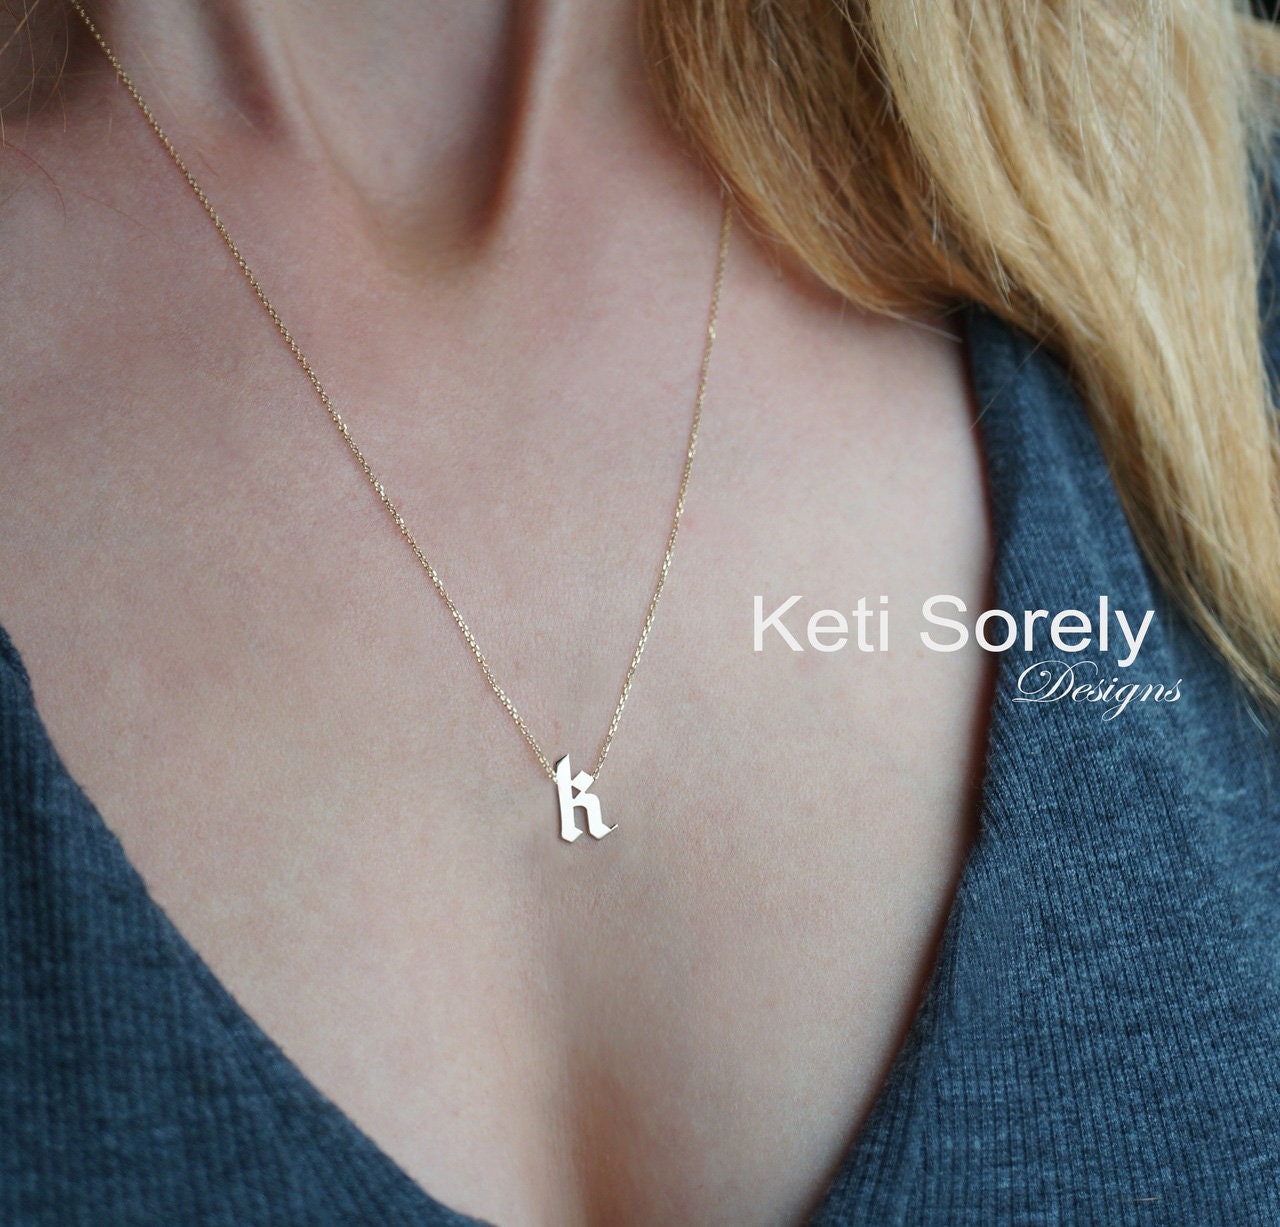 Dainty Gothic Initial Necklace | Initial necklace, Necklace, Initial pendant